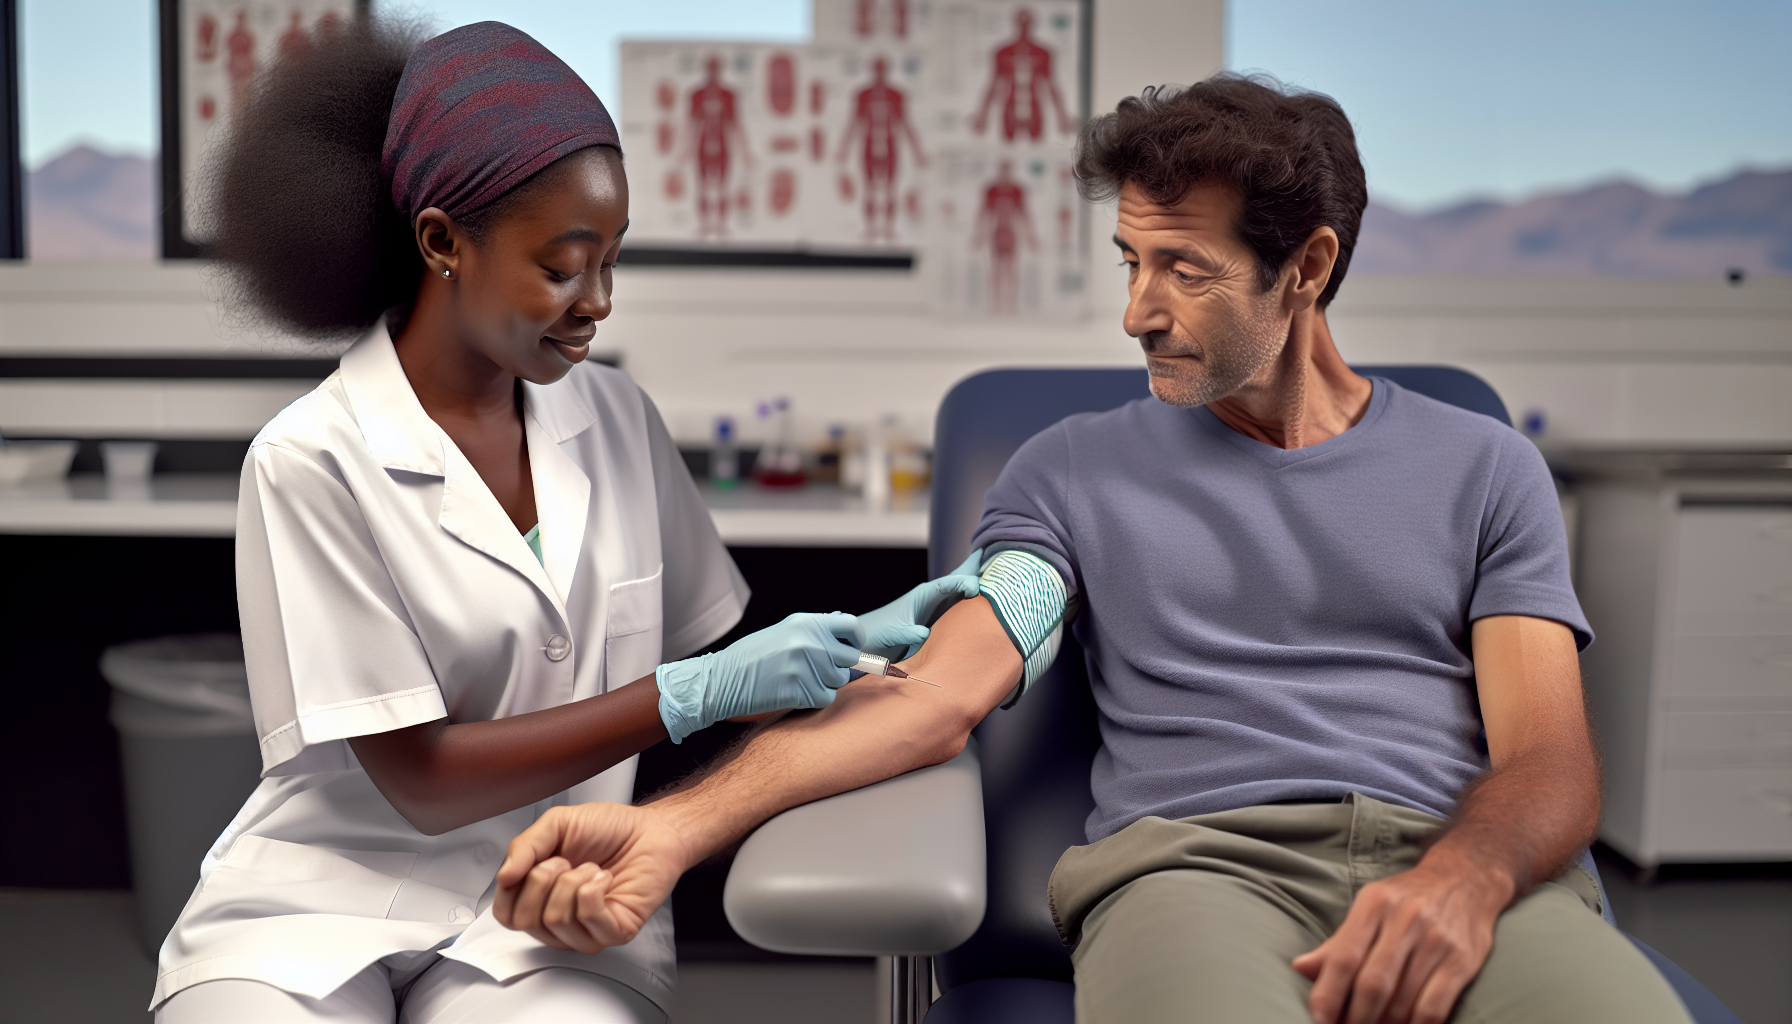 Photo of a person having a blood test